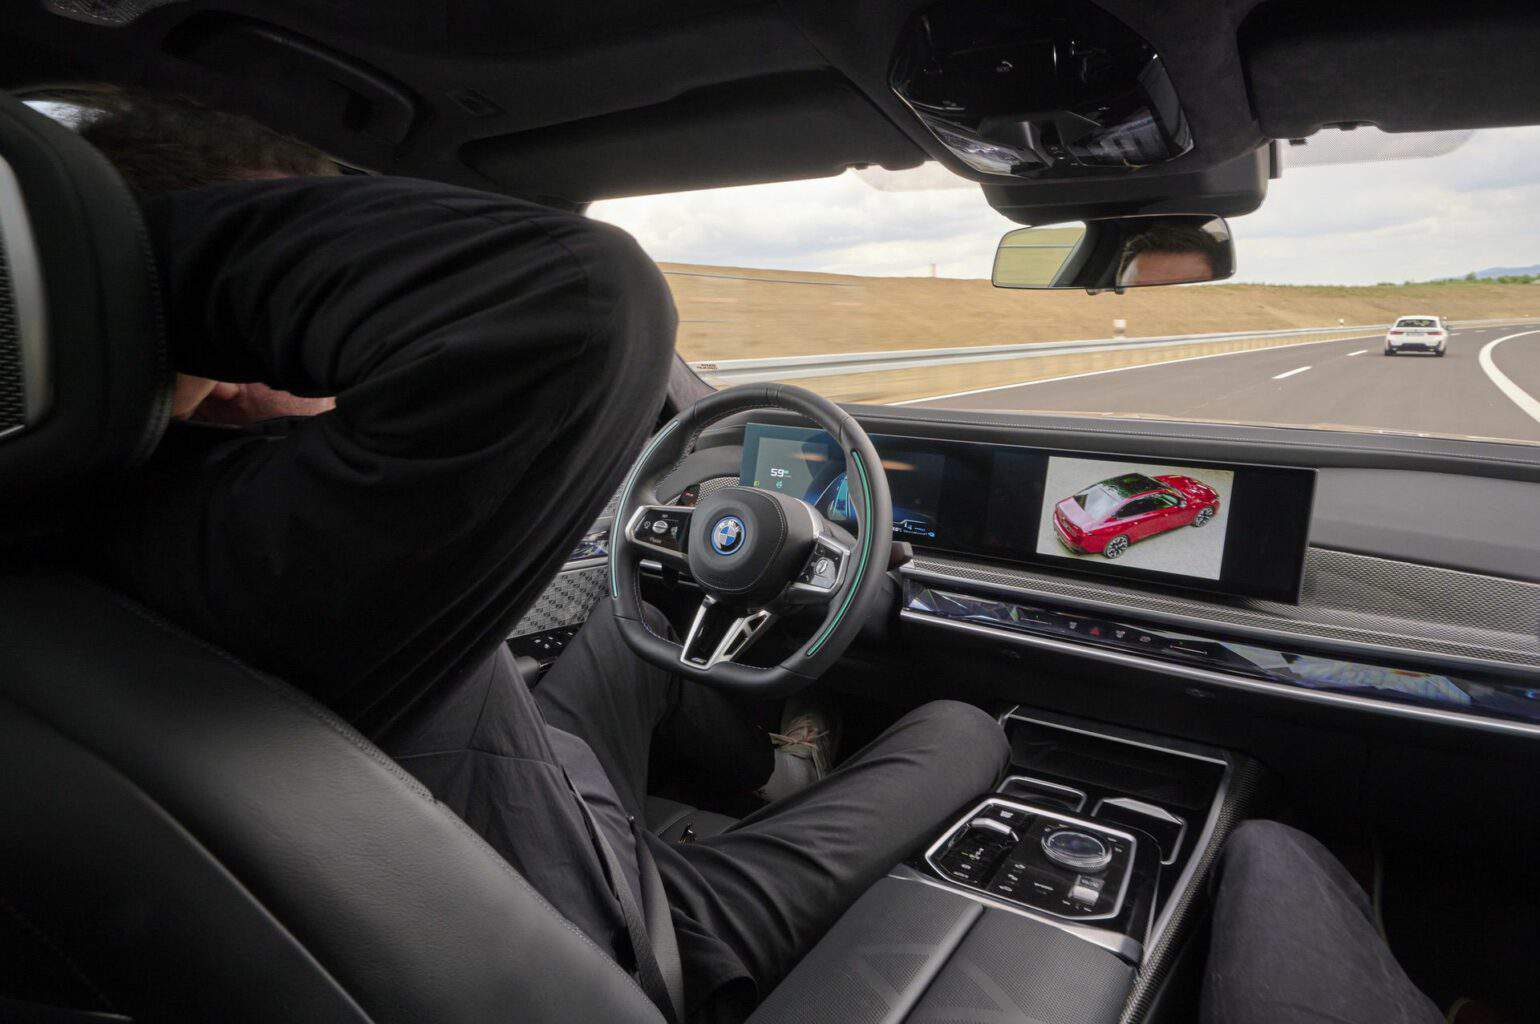 We Tested the First Ever Level 3 Self-Driving in a BMW